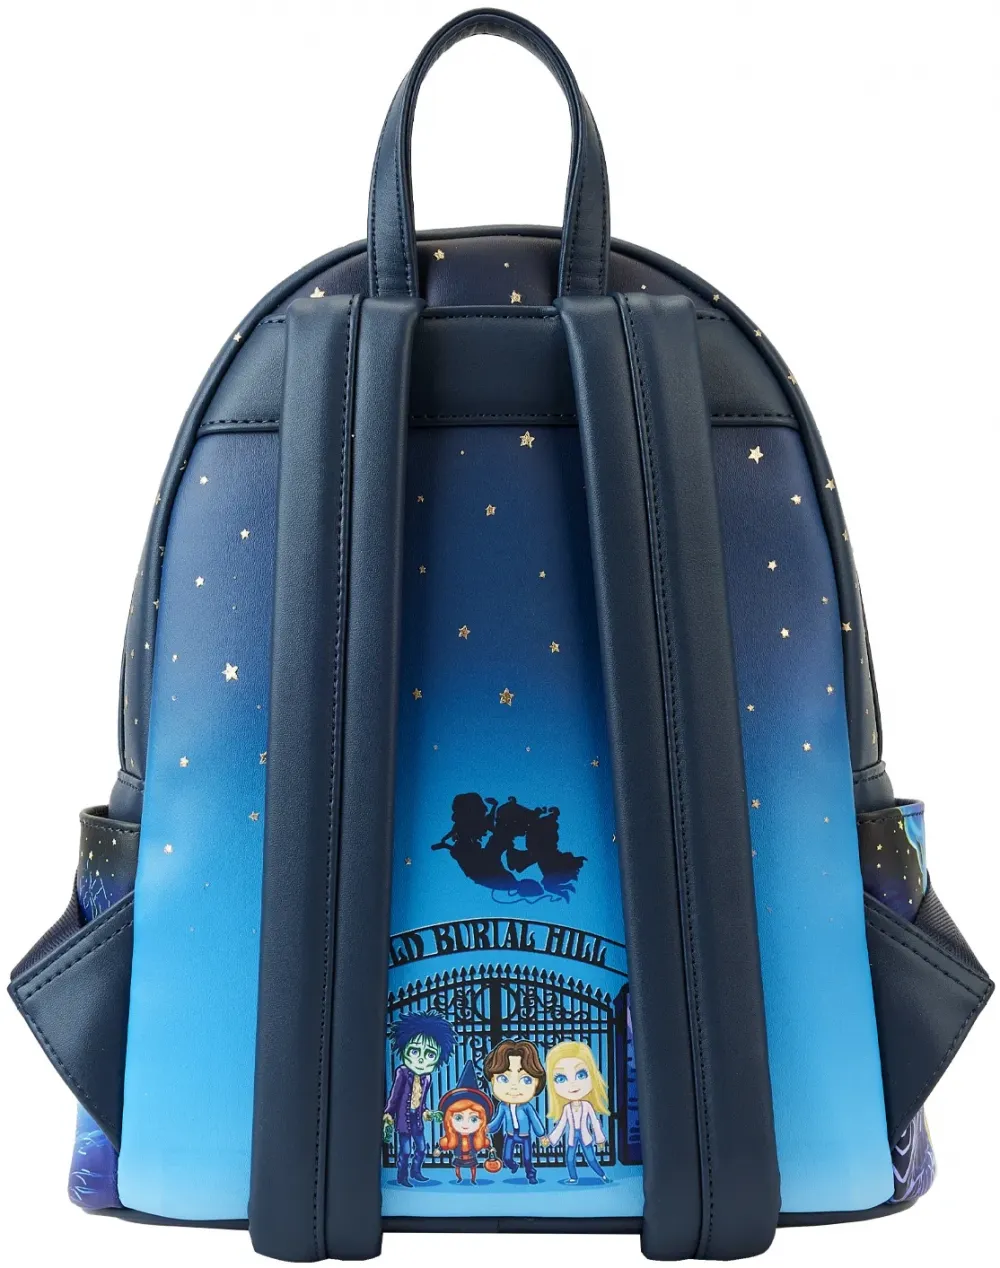 Hocus Pocus Movie Poster Glow Mini Backpack Loungefly